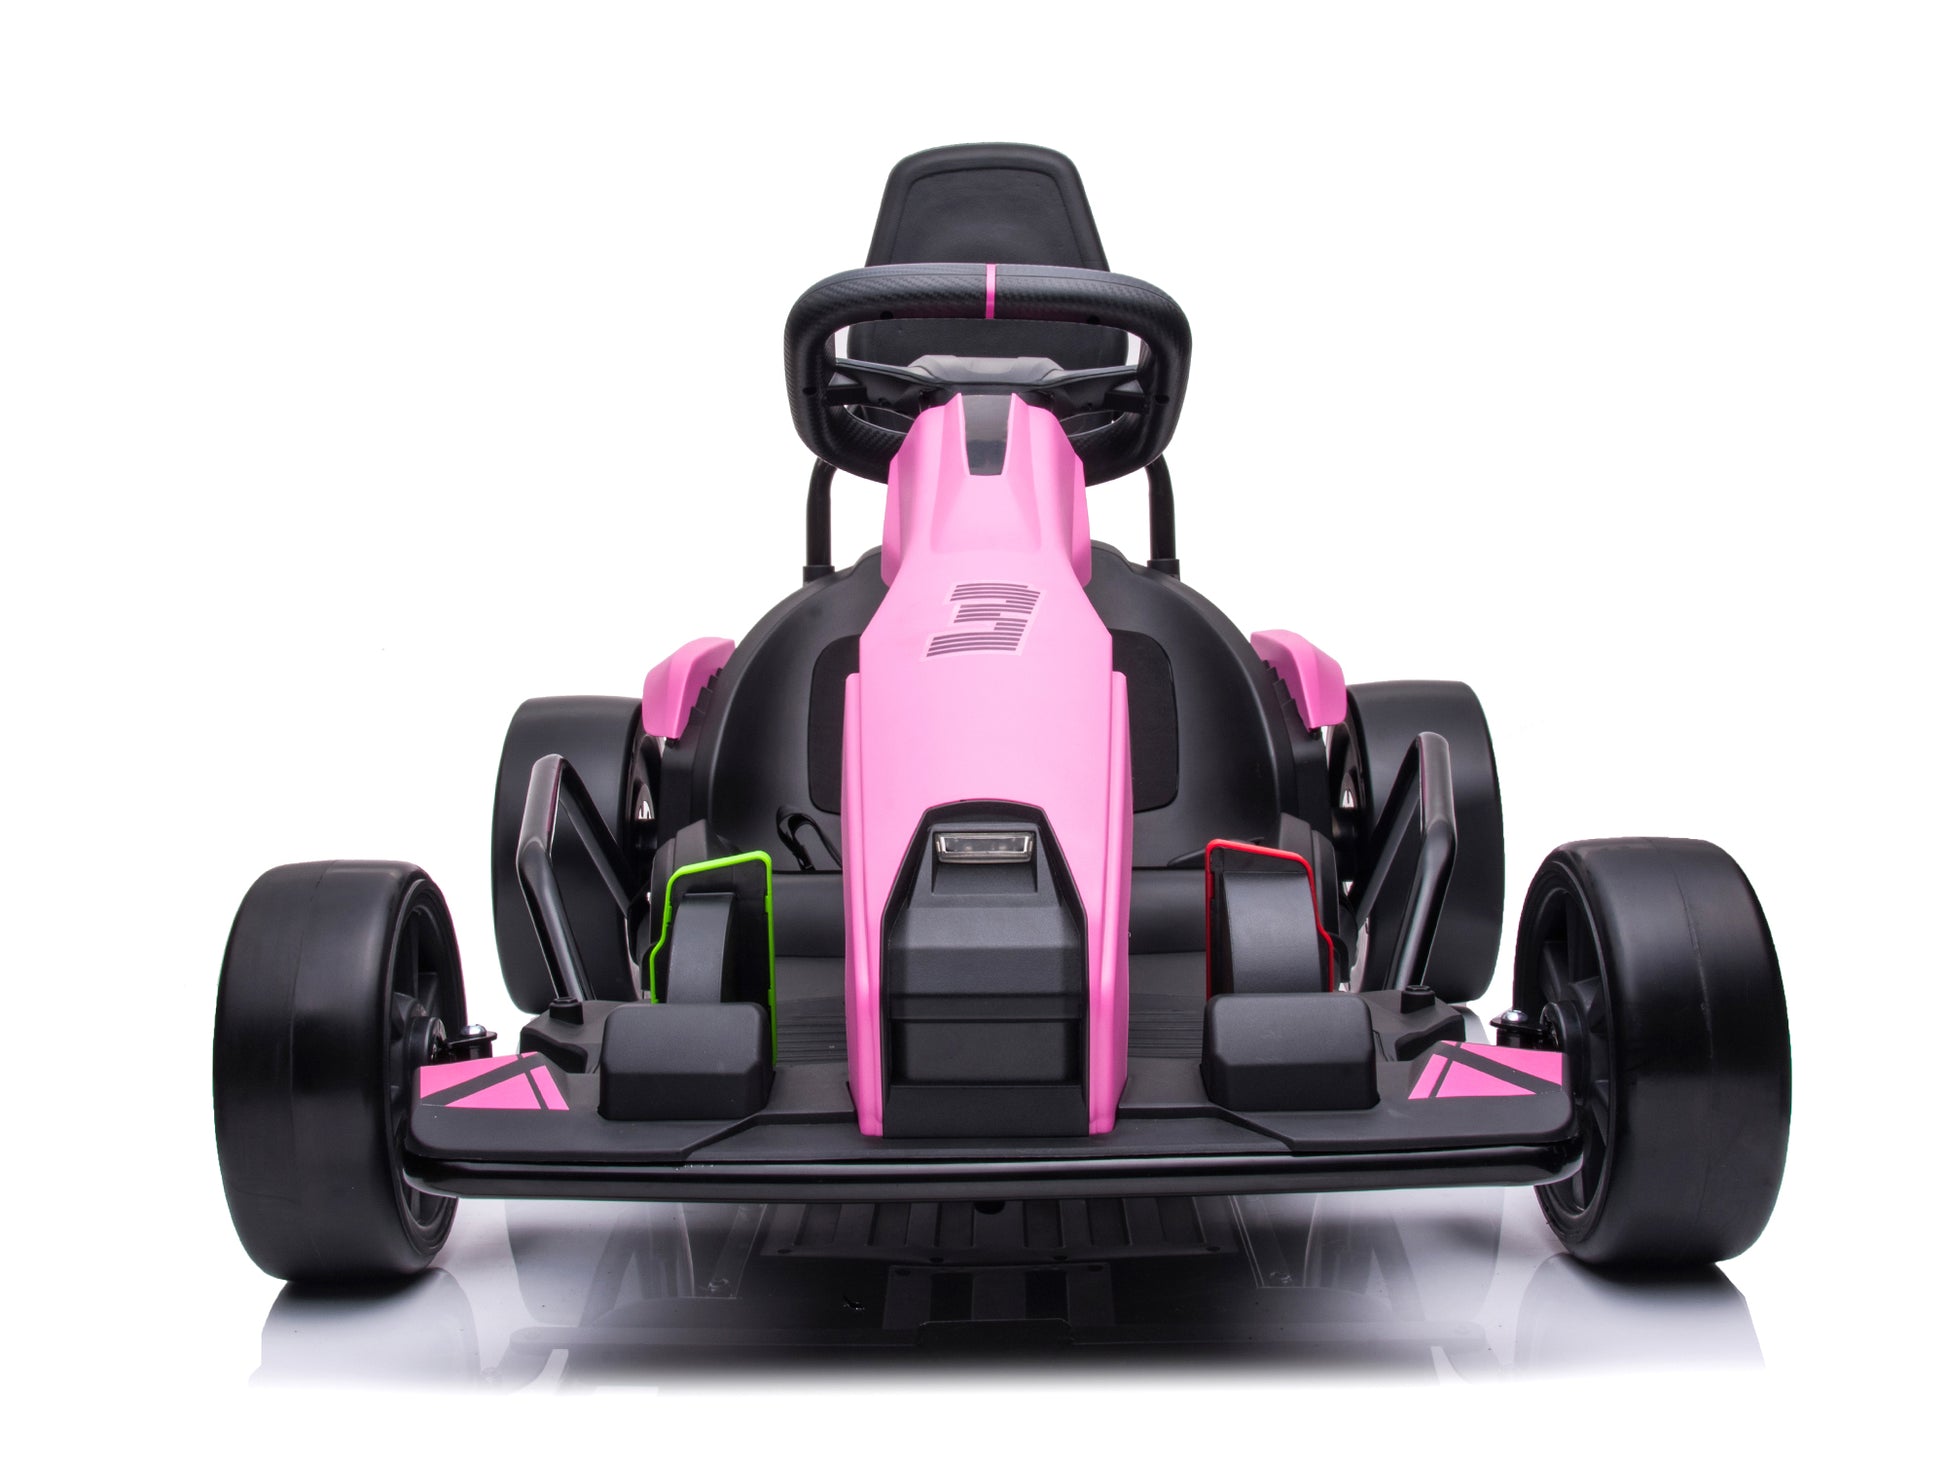 RIDINGTON 24V Electric Drift Go-Kart Electric Vehicle for Kids - Battery Powered Ride On Toy - Pink